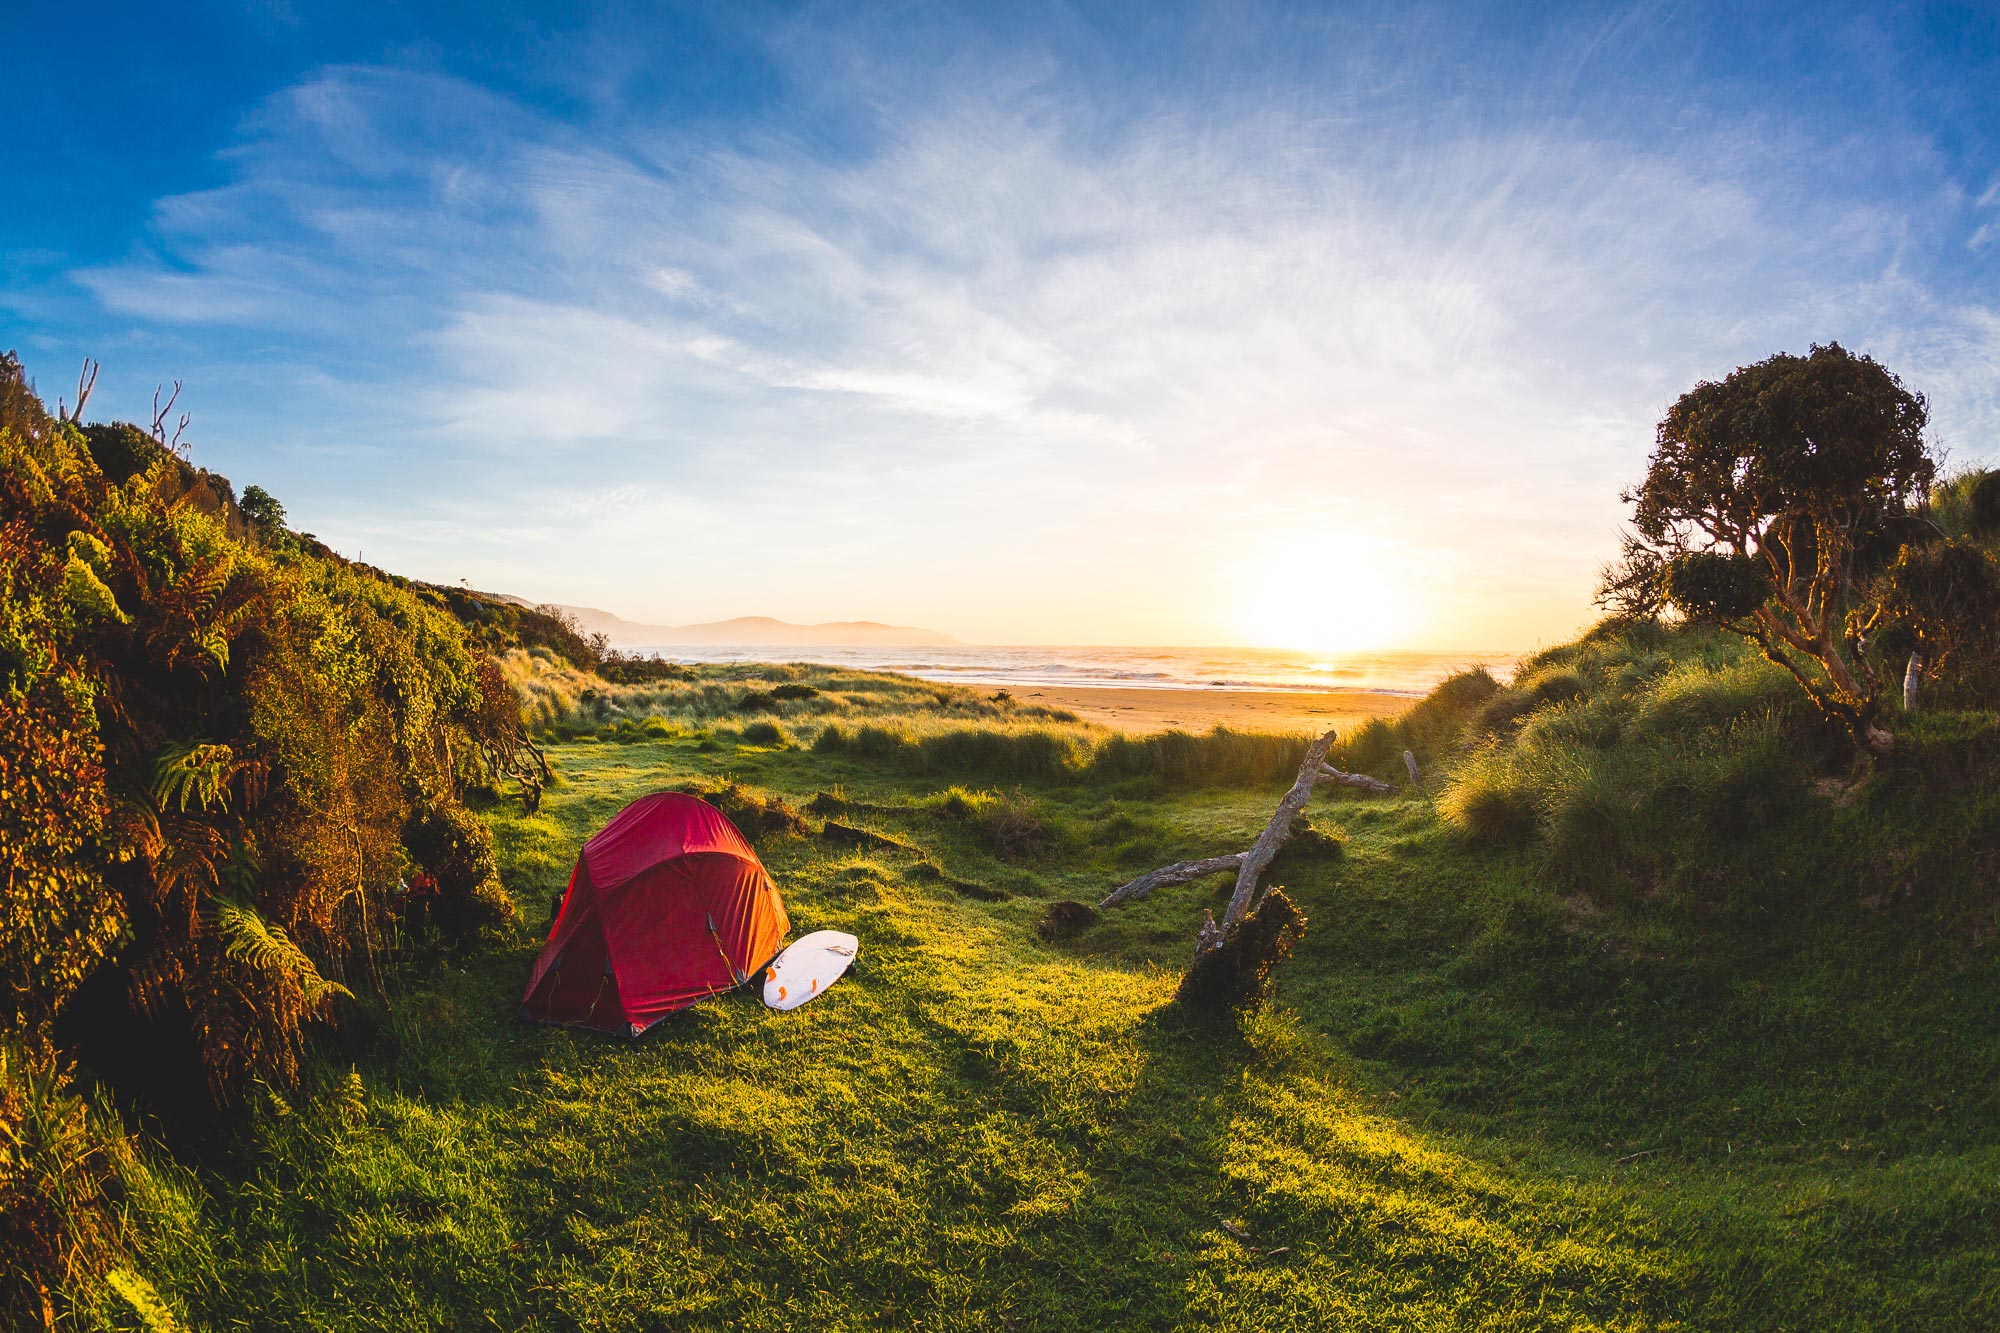 Camping at the beach in New Zealand.